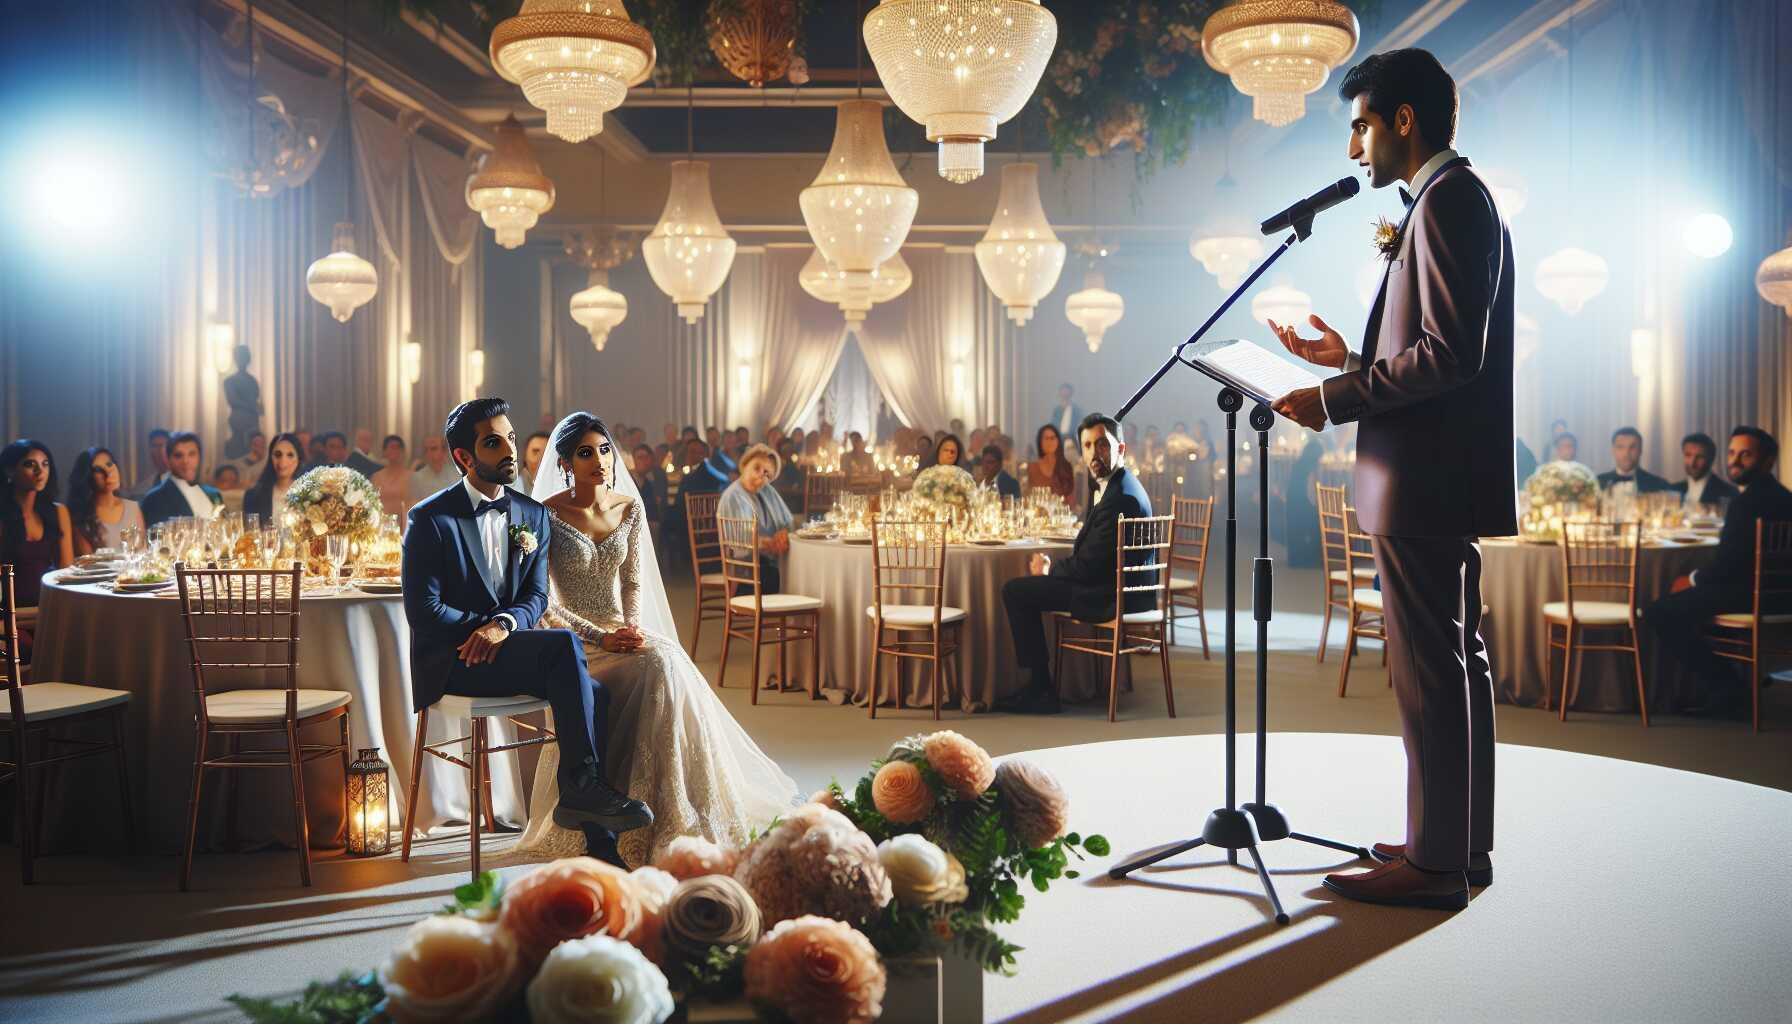 5 Benefits of Hiring Wedding Speech Writers for a Memorable Day